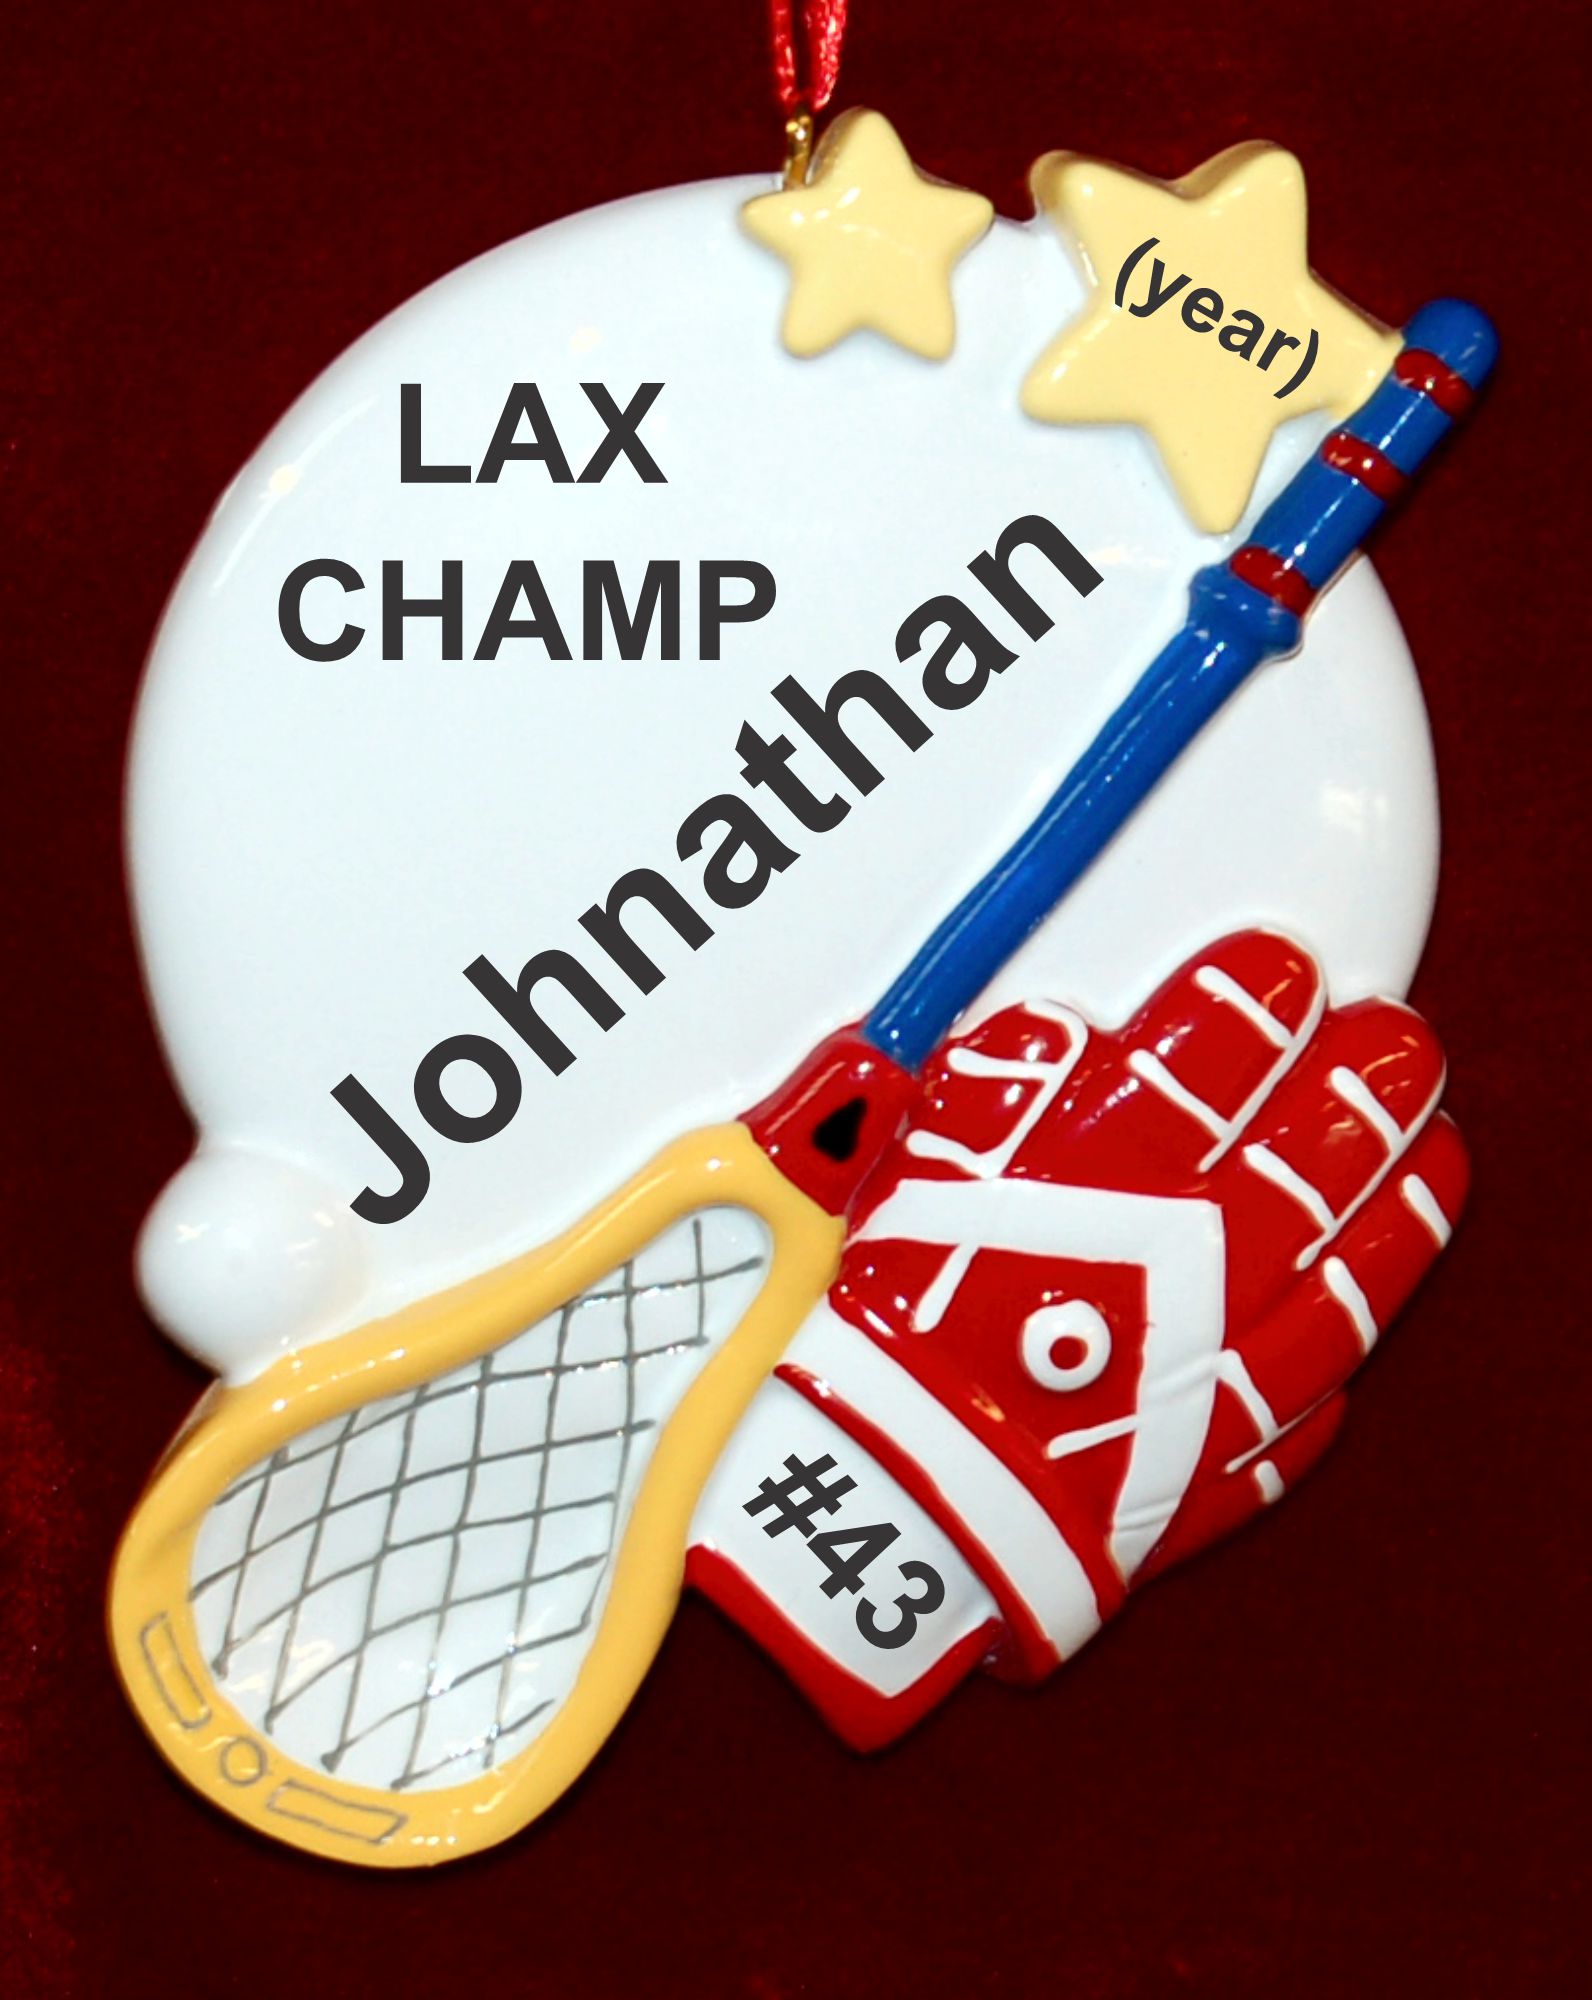 Lacrosse Christmas Ornament Champ Player Personalized by RussellRhodes.com